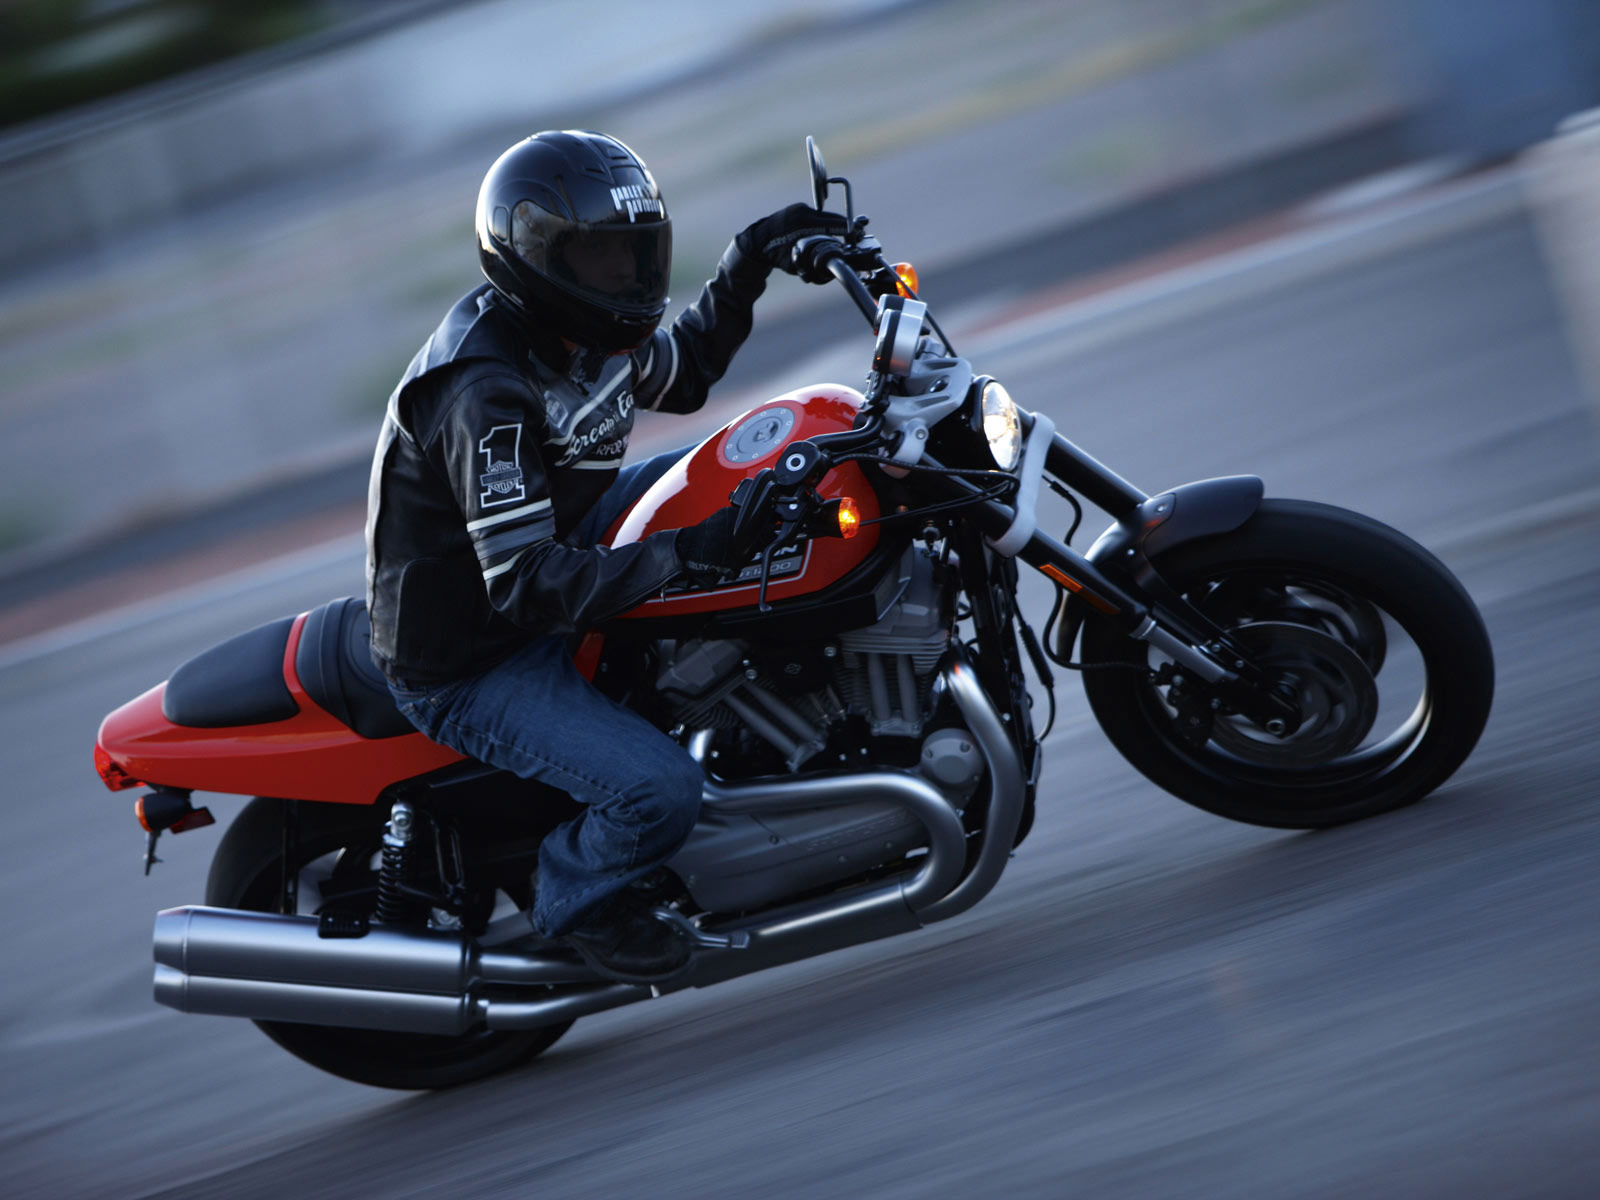 Harley Davidson Pictures Specs Insurance Accident Lawyers Images, Photos, Reviews